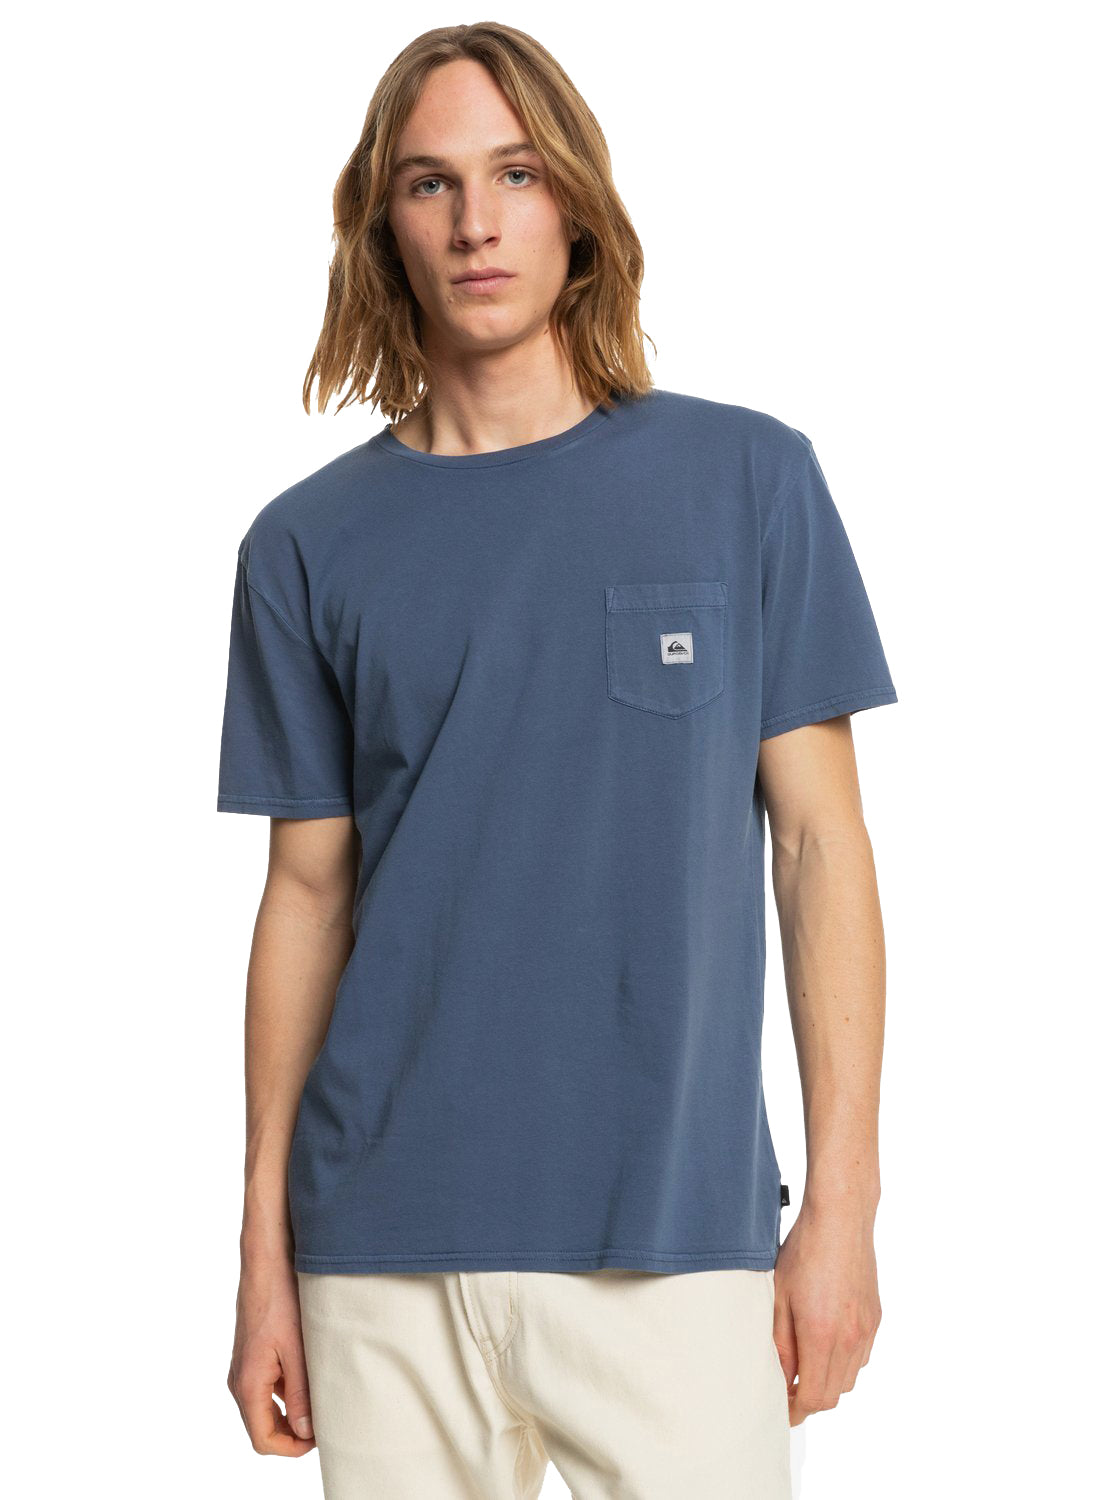 Quiksilver Sub Missions SS Tee BPY0 S